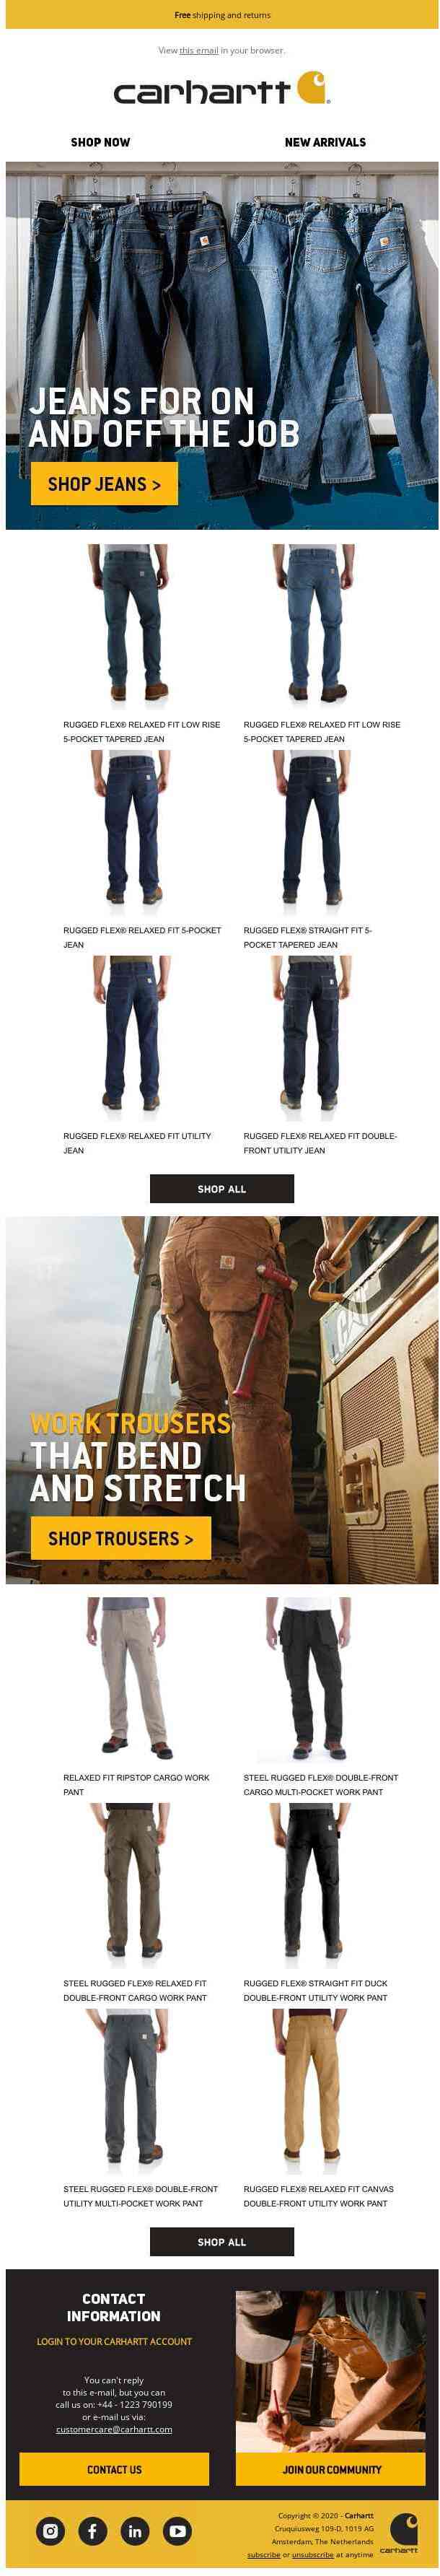 Jeans and work trousers for every job